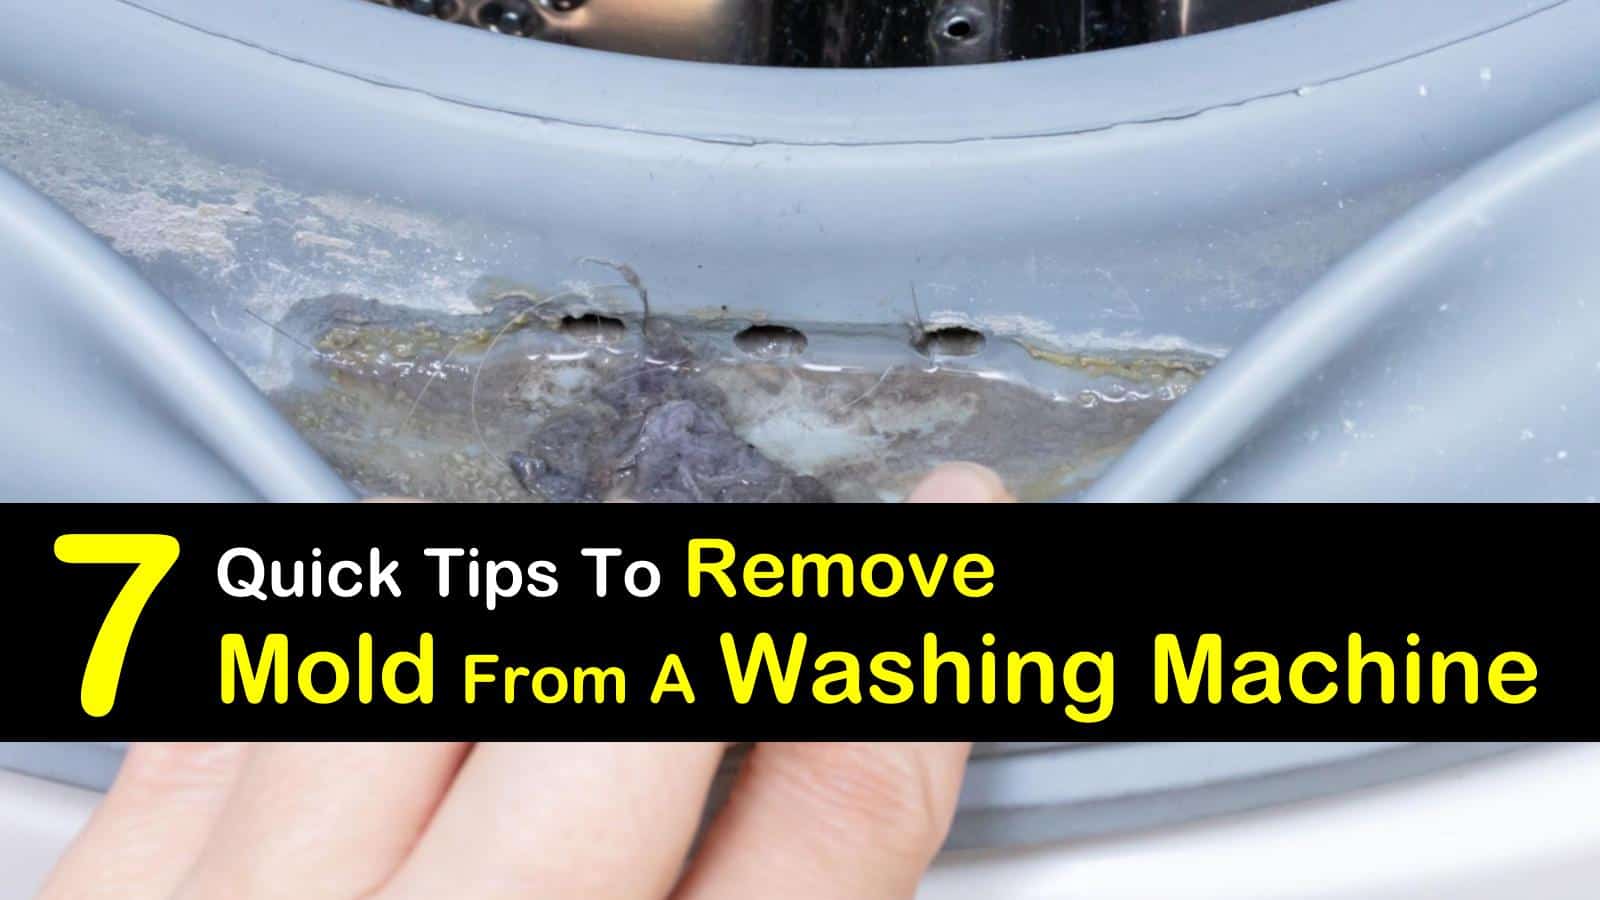 How To Remove Mold From Washing Machine - www.inf-inet.com